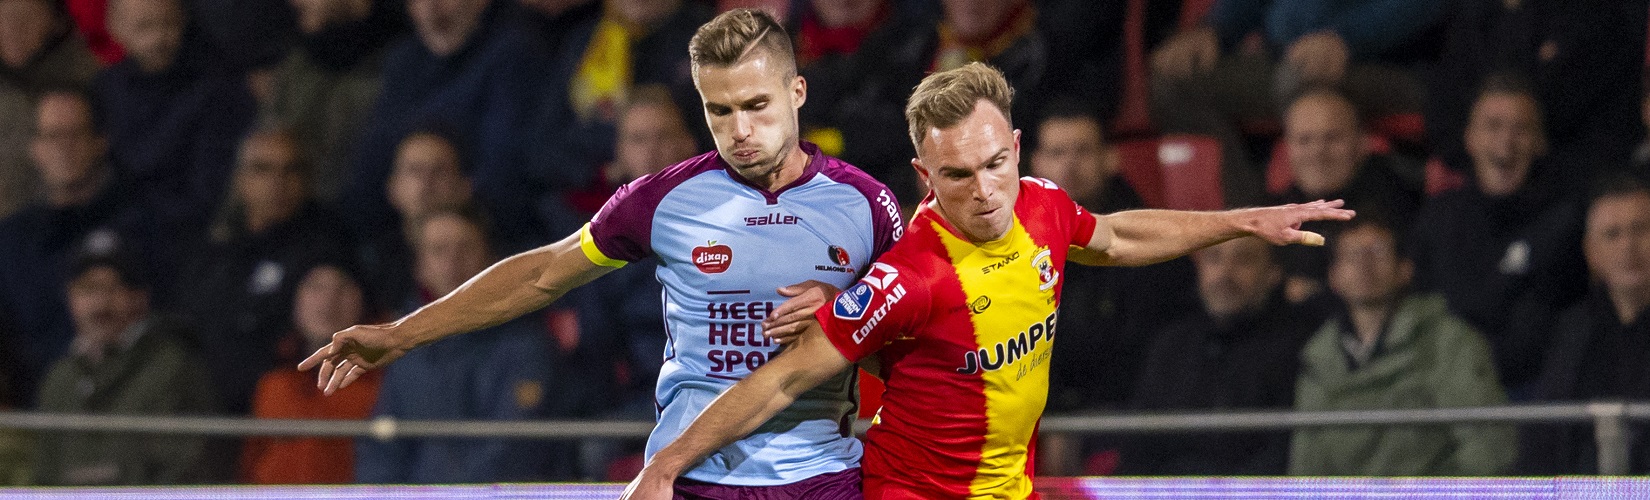 Netherlands: Go Ahead Eagles Vs Helmond Sport (cup)